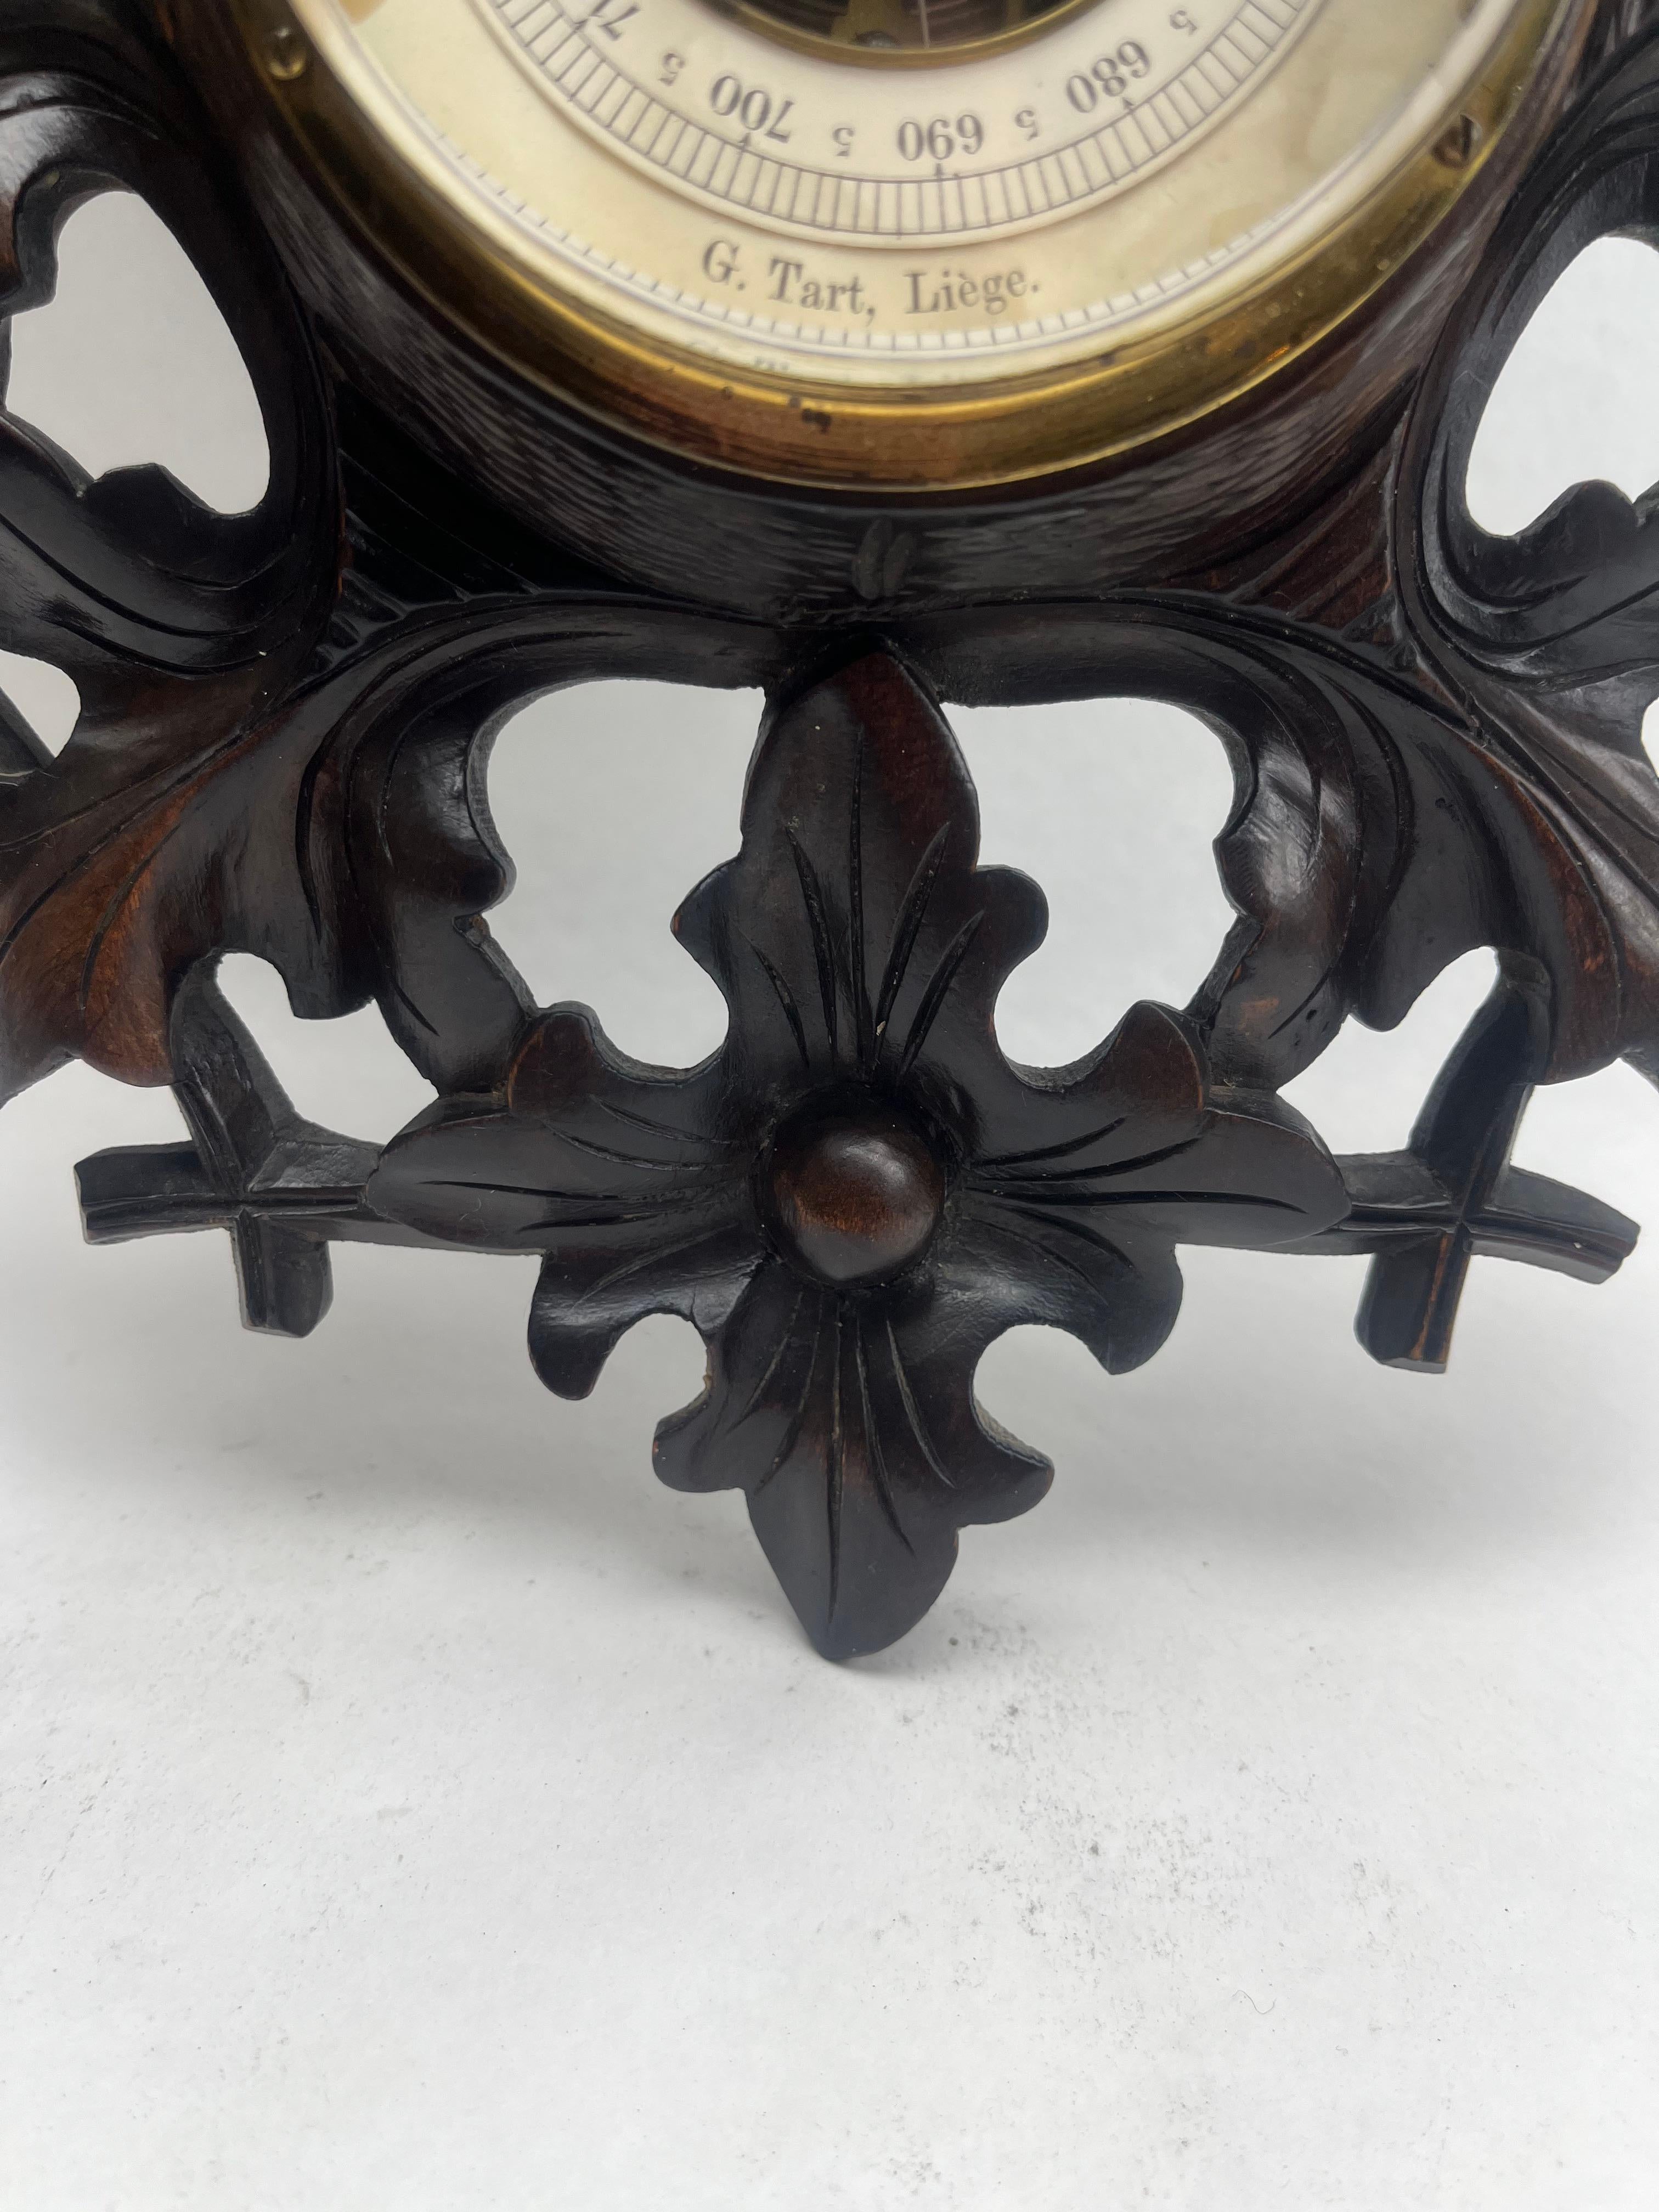 Belgian Carved Wooden G.Tart Liege Antique Belgium Barometer with Thermometer, 1910s For Sale